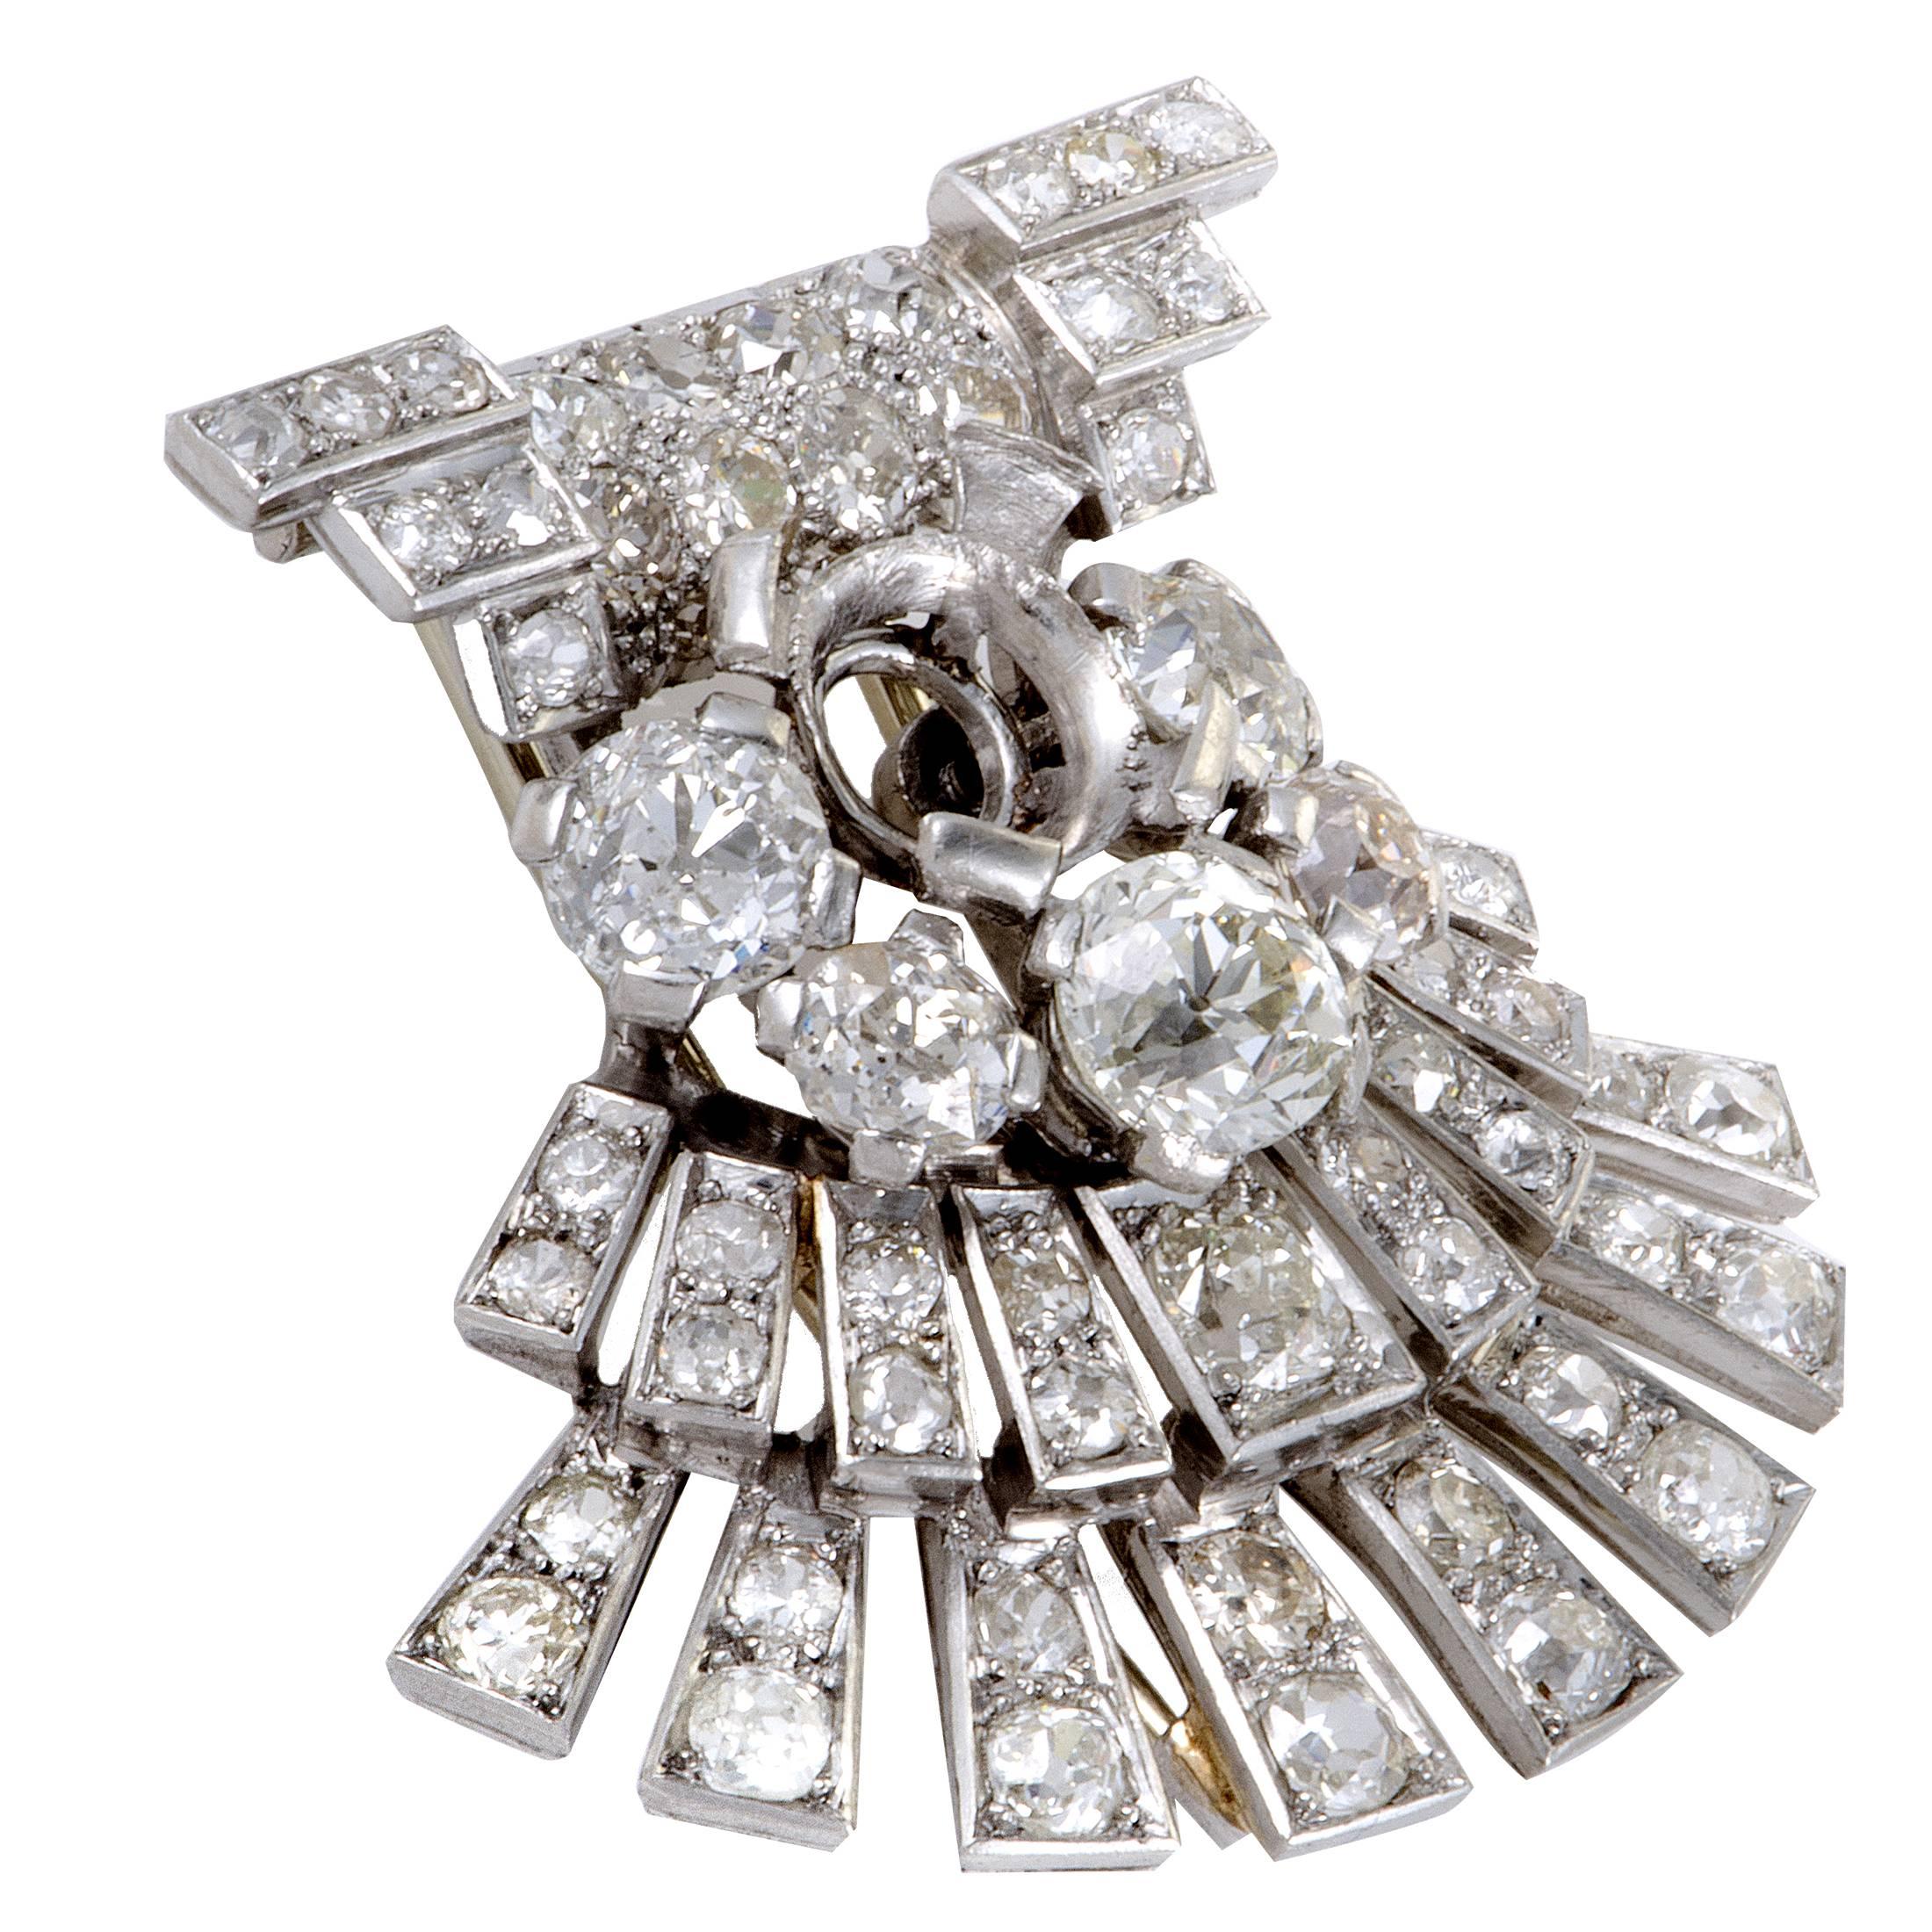 Offering a look of utmost luxury and glamour, this fascinating antique brooch is a must-have for any high-end jewelry collection. The brooch is made of prestigious platinum and set with a plethora of resplendent diamonds that total 7.50 carats.
